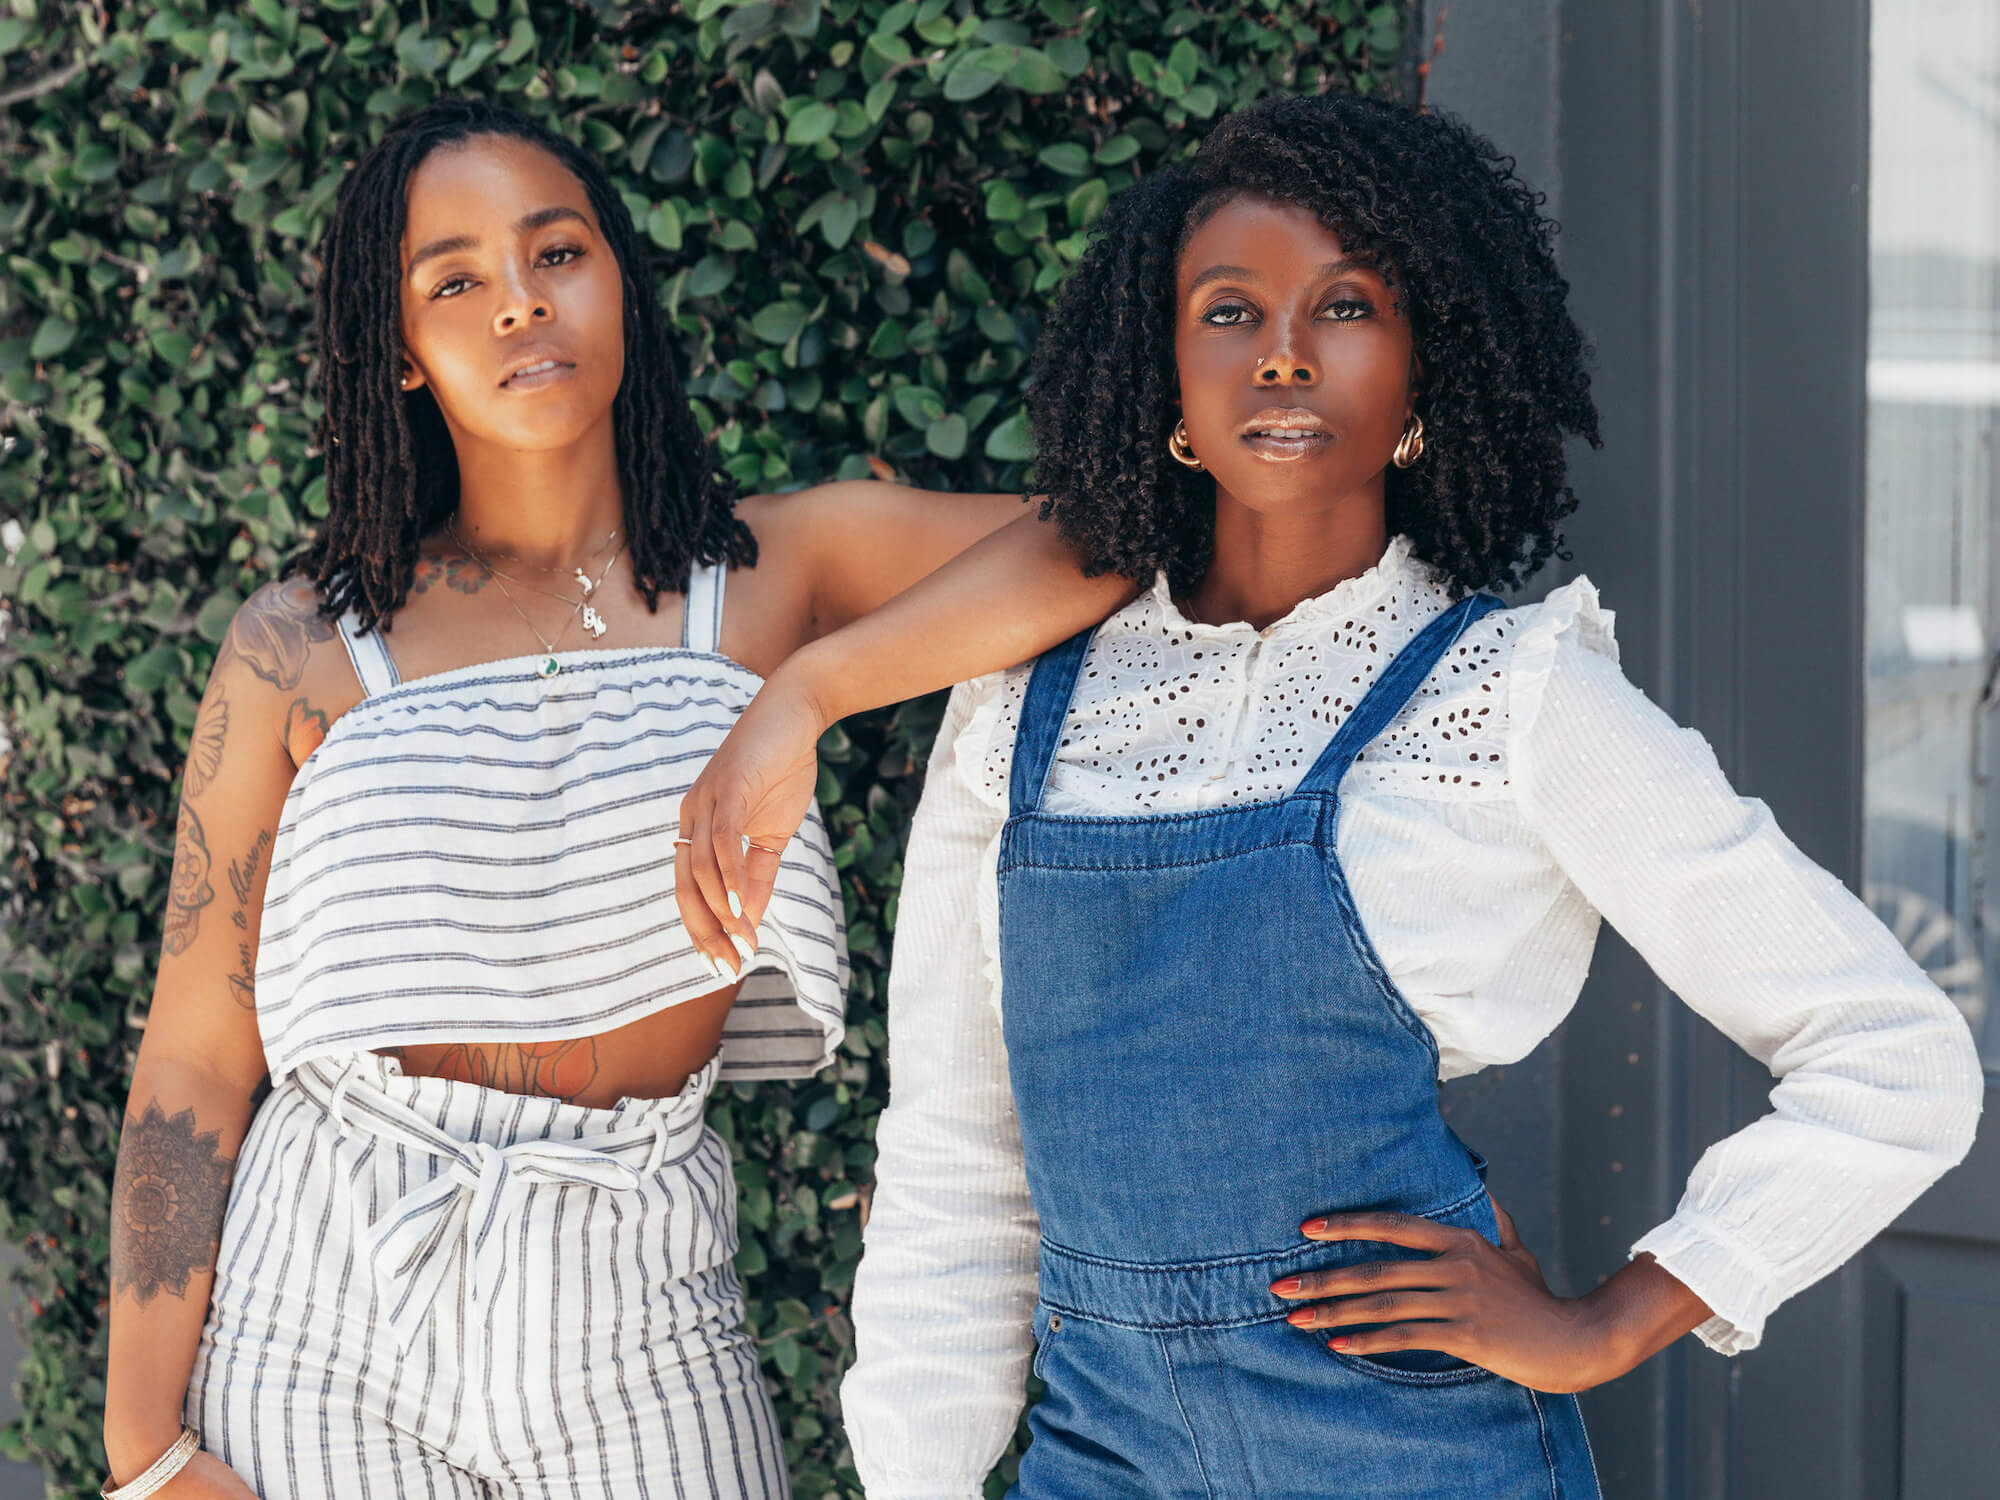 FRIENDS OF NED: GERMANI & BRITTANY OF THE BLACK GIRL BRAVADO PODCAST